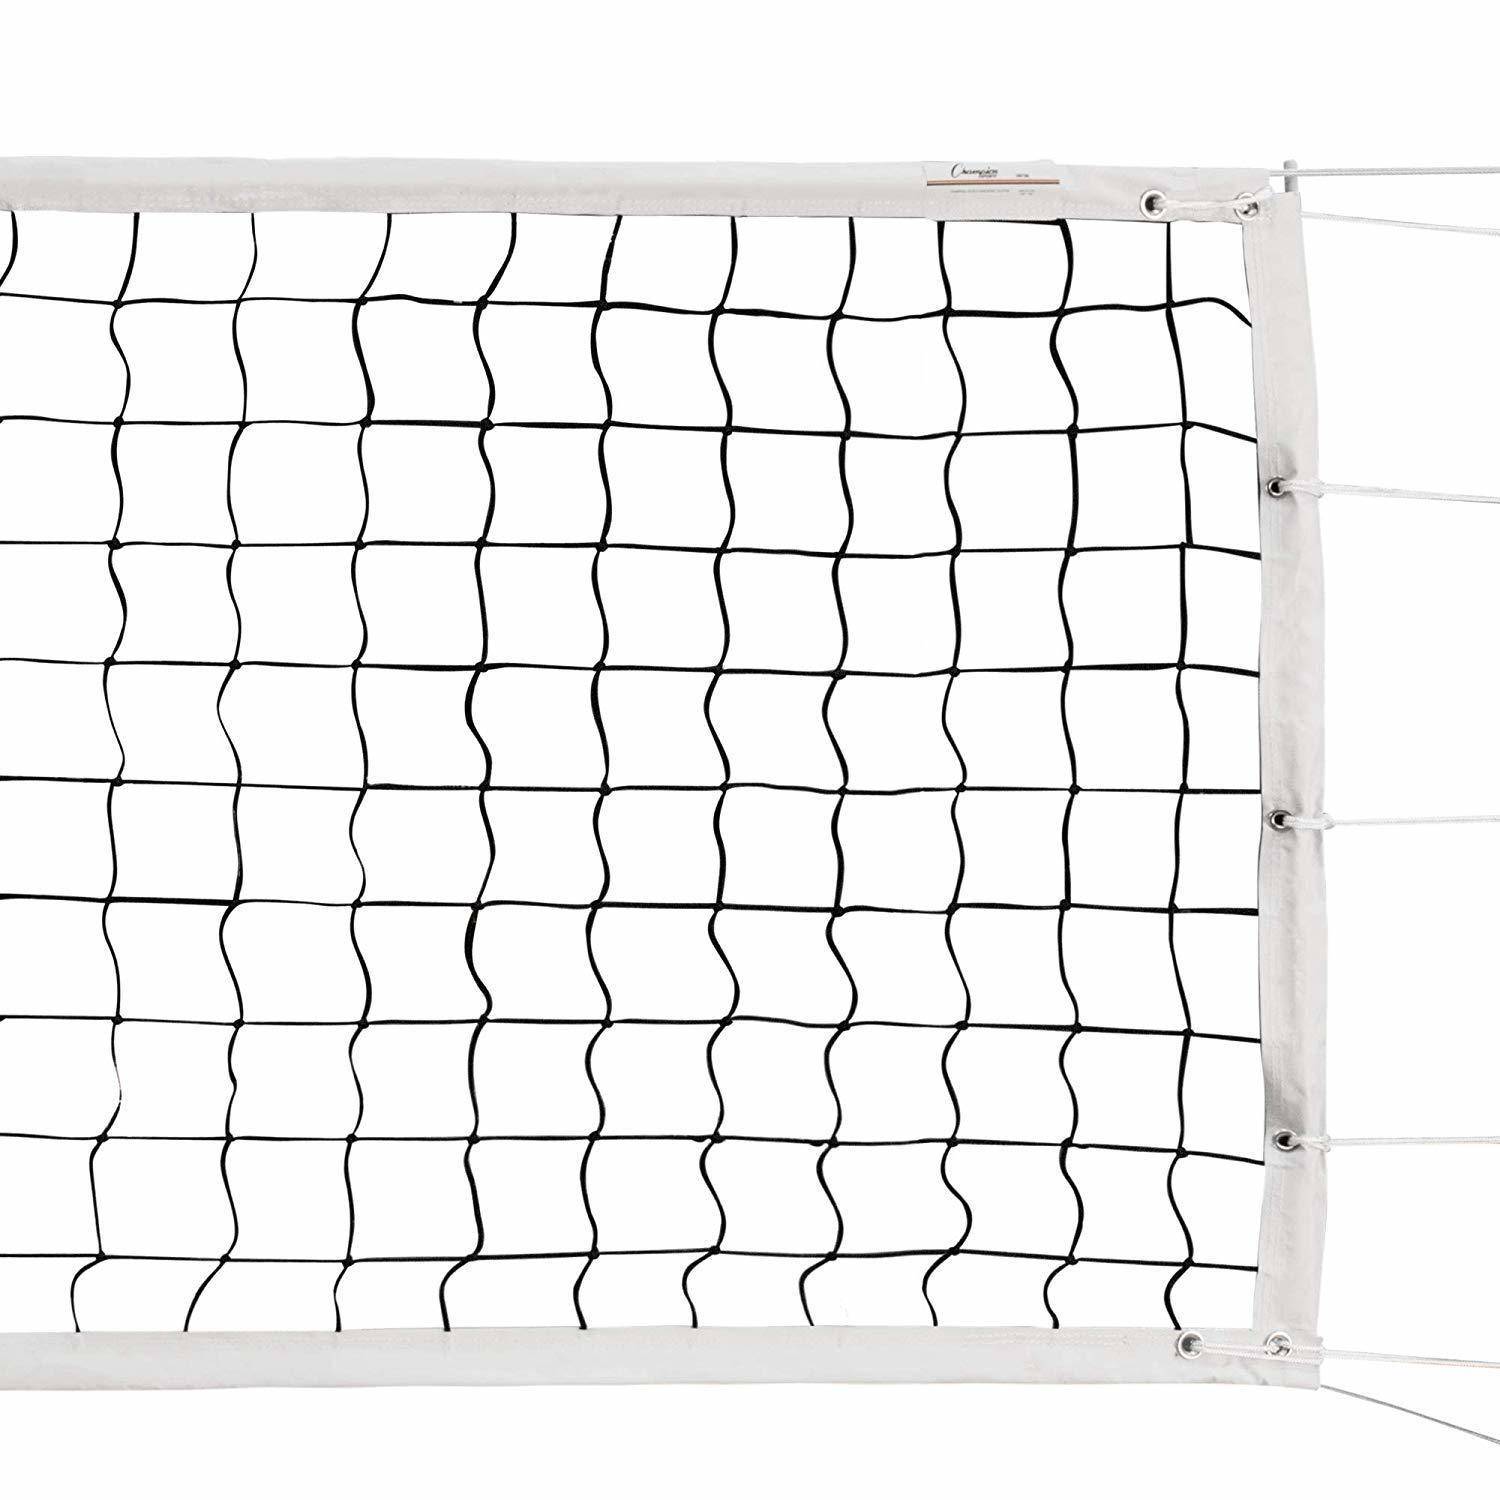 Champion Sports Olympic Power Volleyball Net (3 mm)